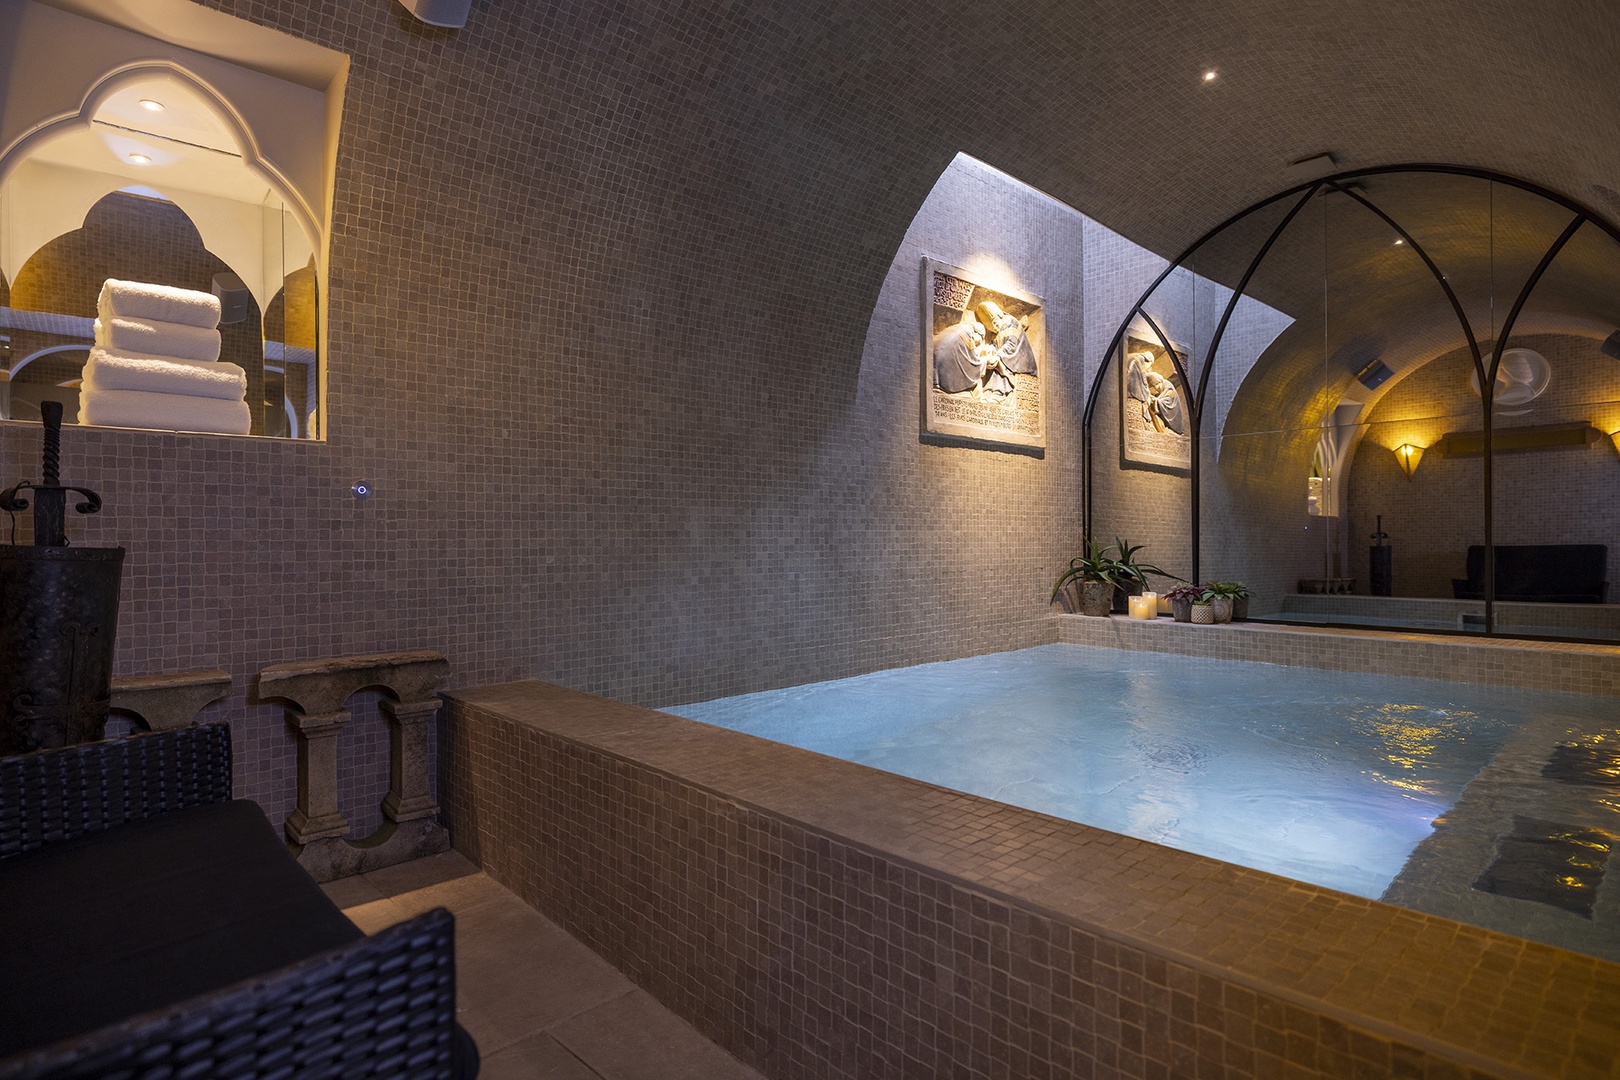 The Vouvray features a private spa and swimming pool on the lower level - a remarkable feature!